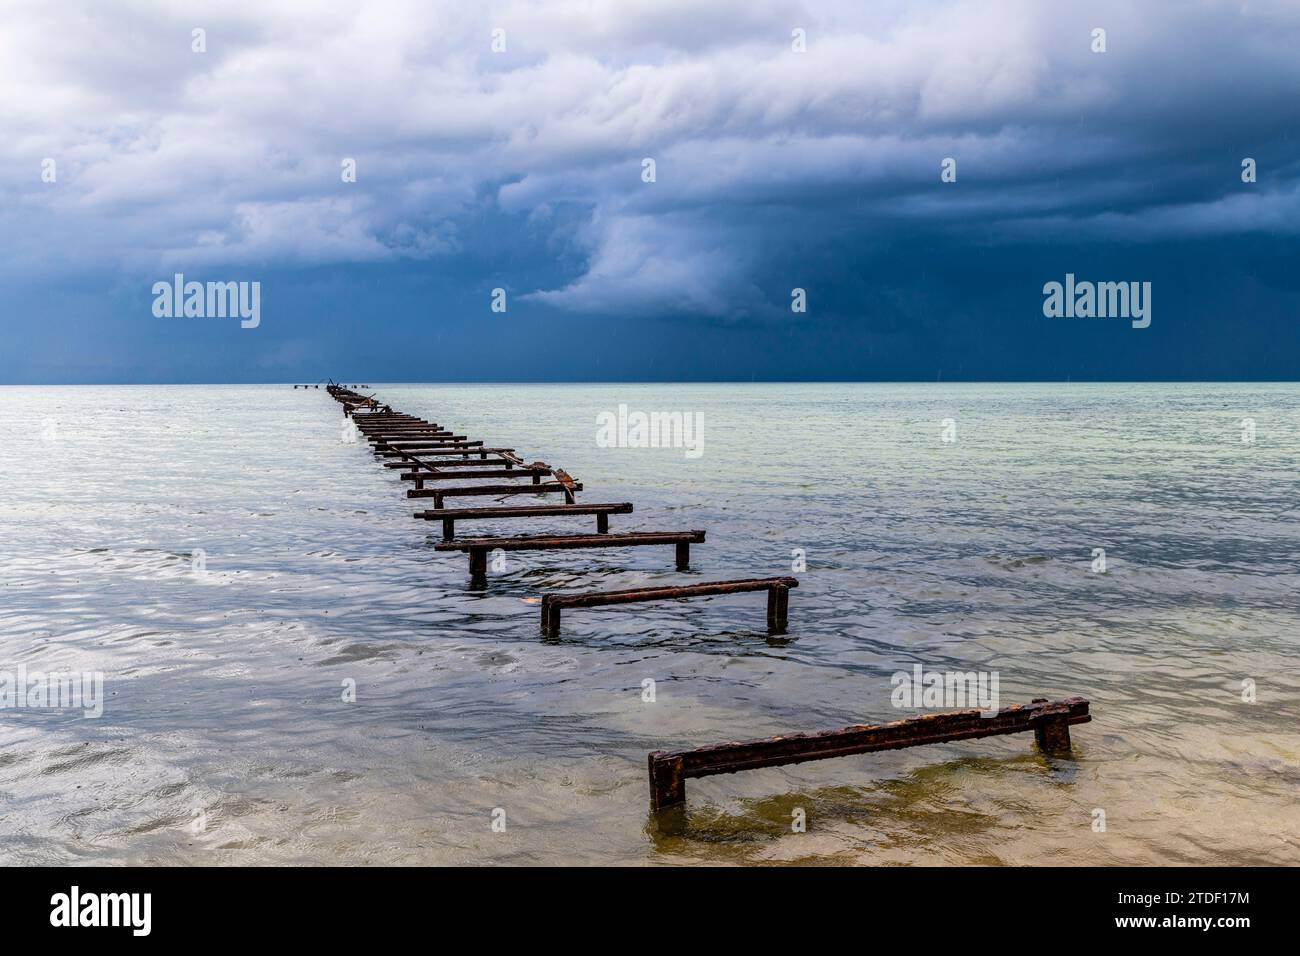 Destroyed pier at a Luxury hotel in Hotel el Colony before a storm, Isla de la Juventud (Isle of Youth), Cuba, West Indies, Central America Stock Photo